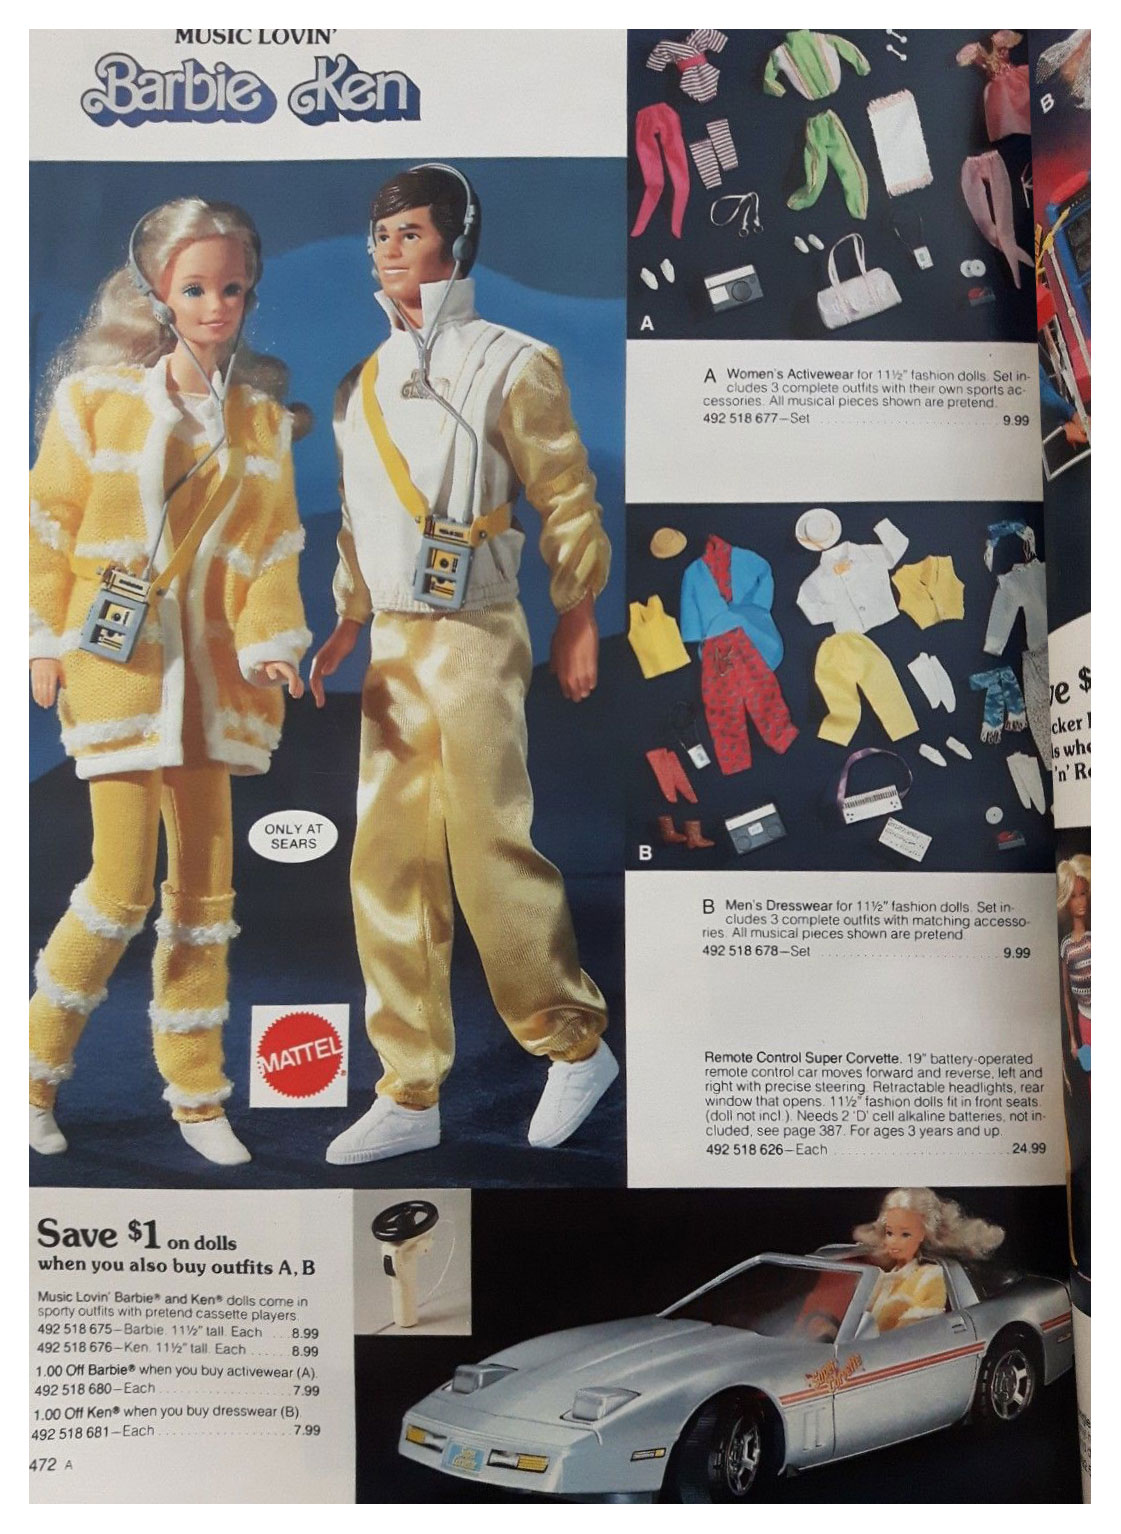 From 1986 Canadian Sears Christmas catalogue